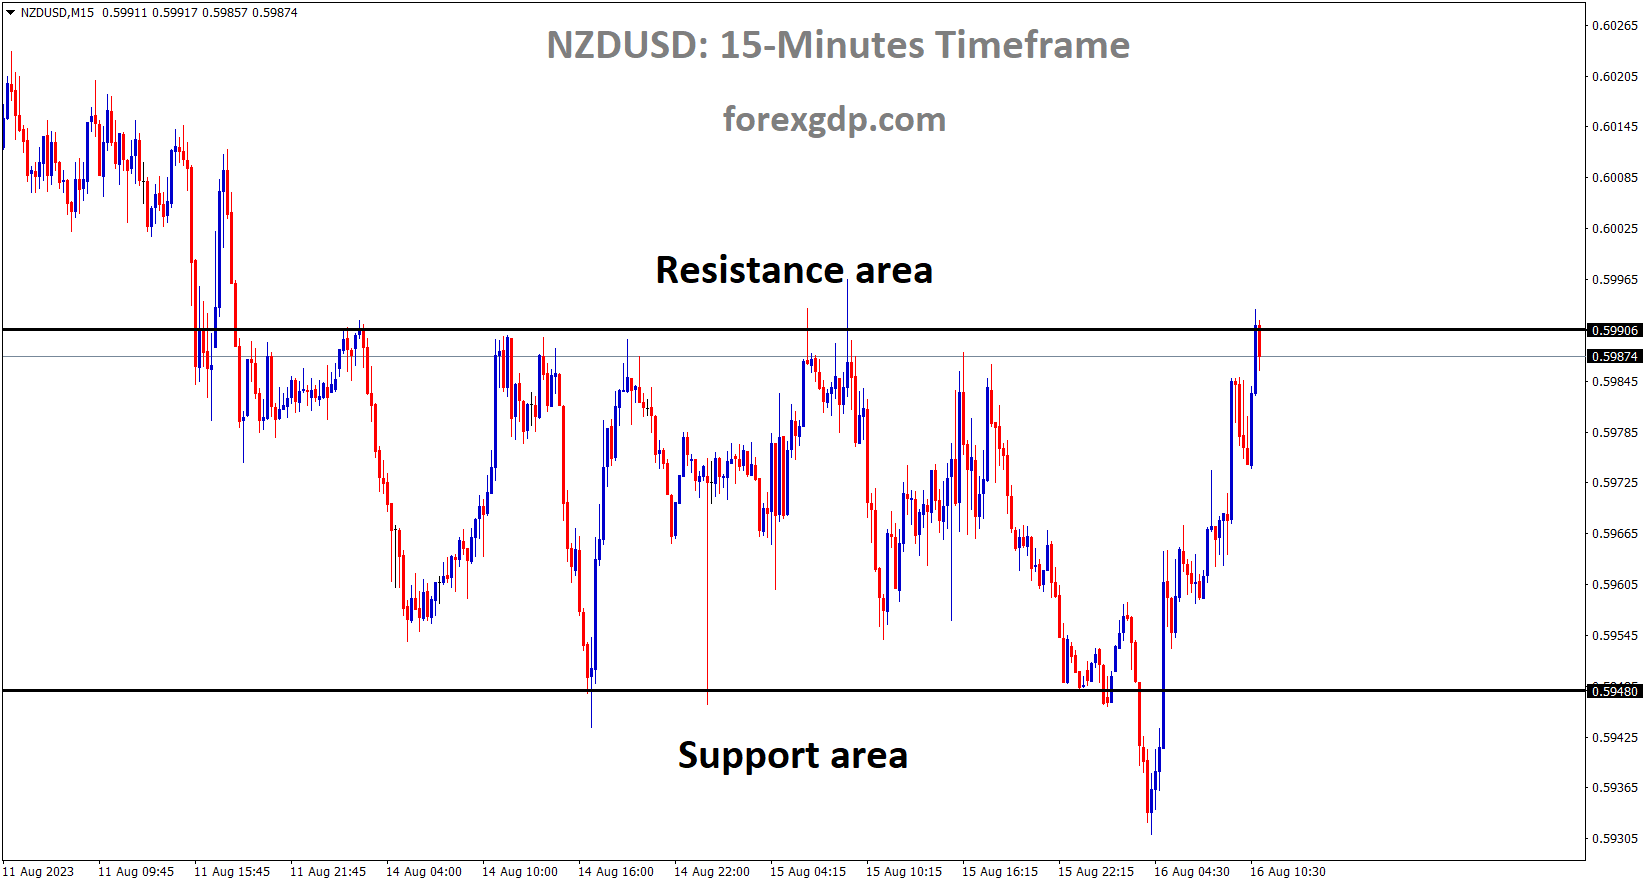 NZDUSD is moving in the Box pattern and the market has reached the Horizontal resistance area of the pattern